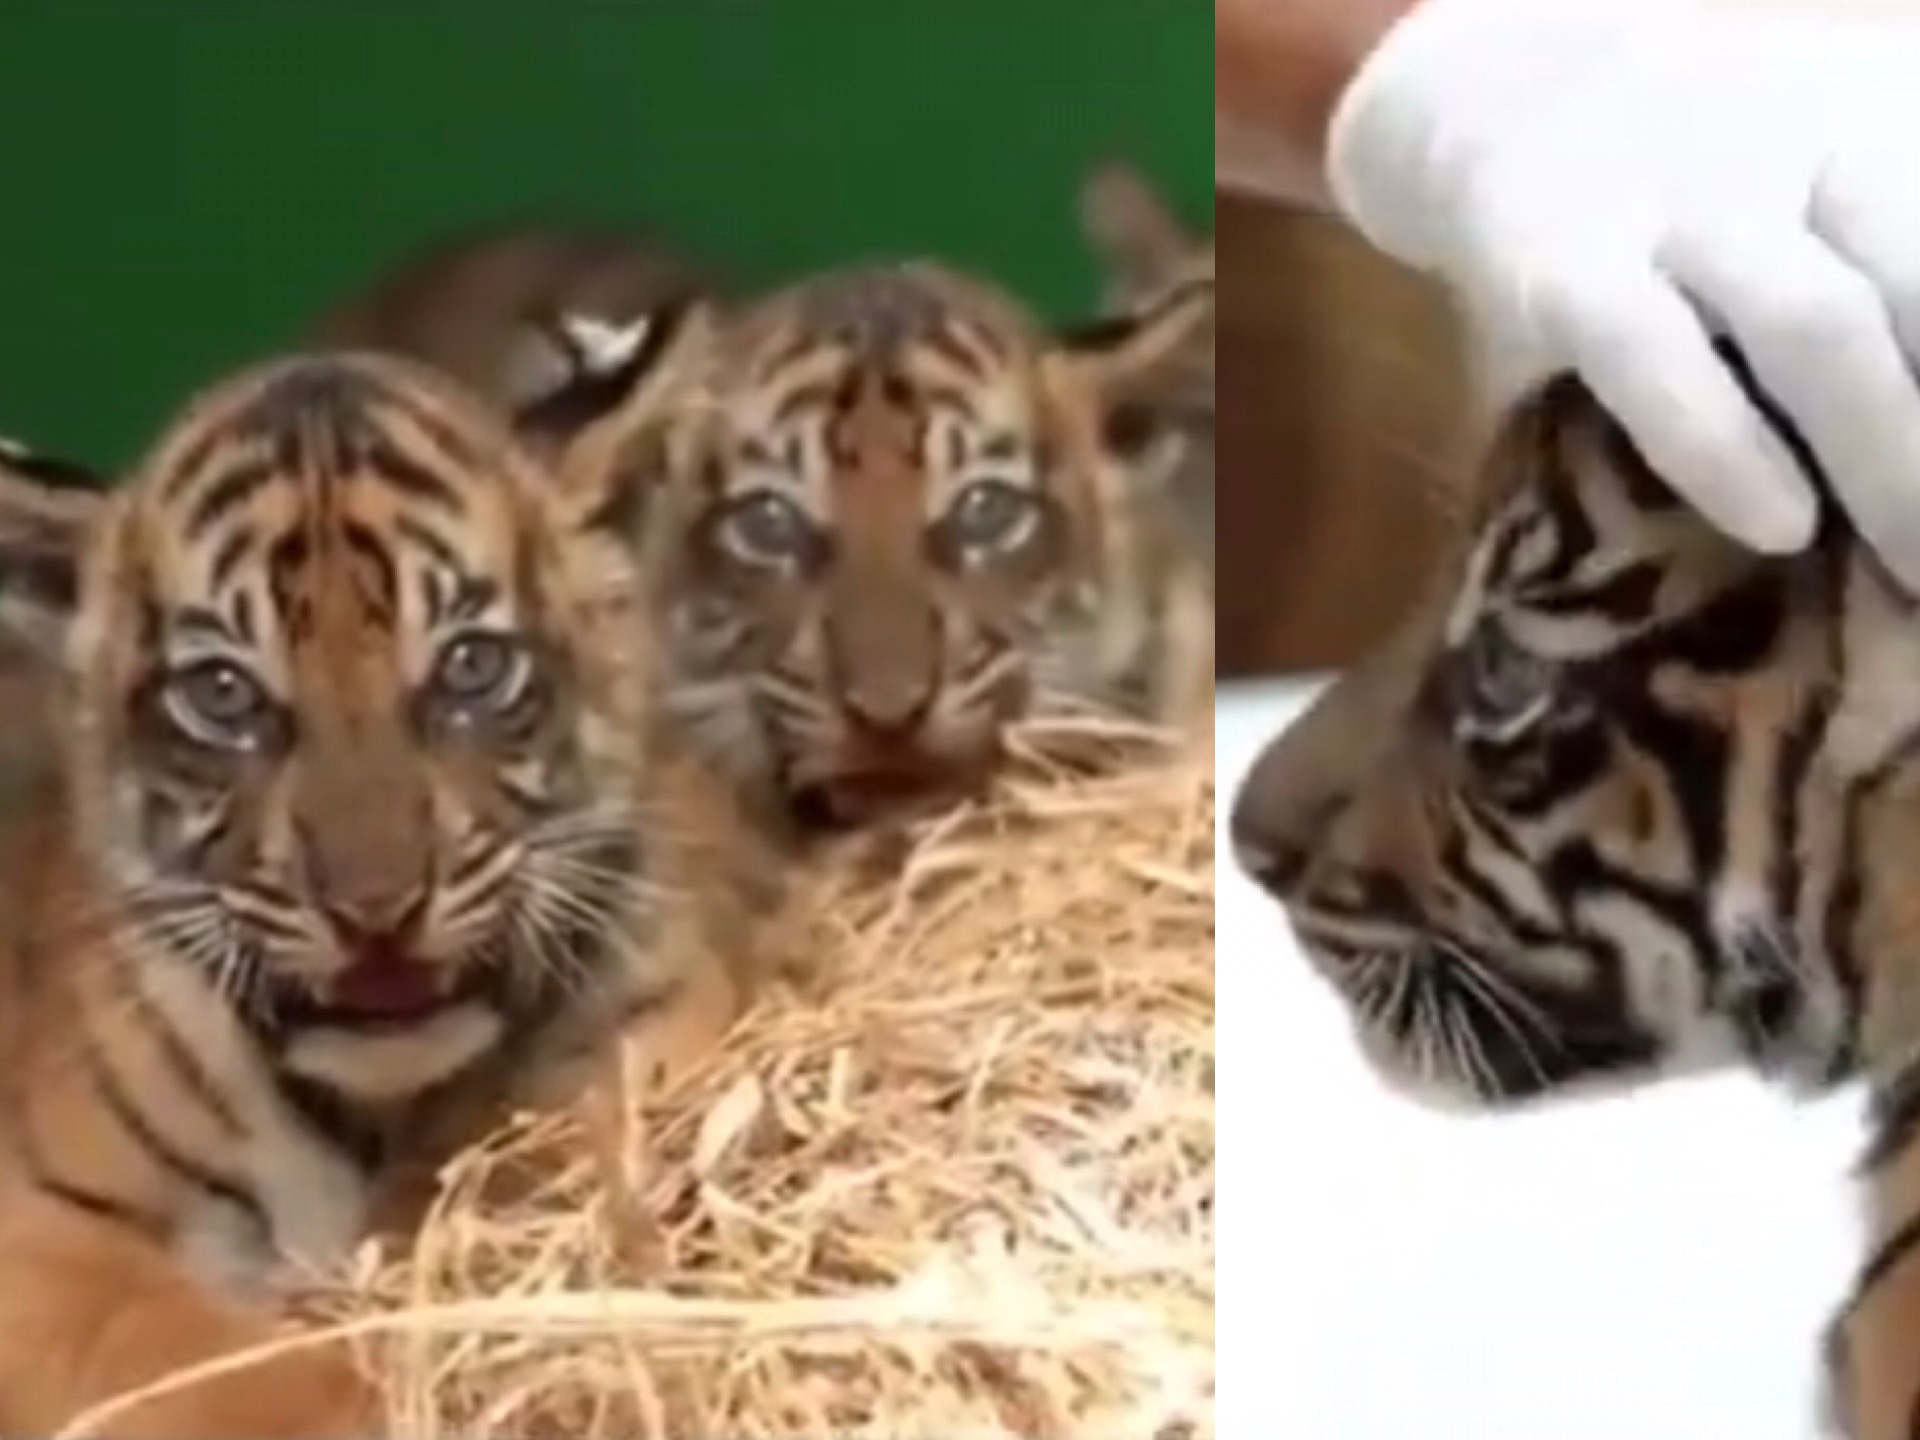 Baby Sumatran tigers at Bali Zoo: The triplet cubs were born on Tuesday afternoon. Photos: Bali Zoo/Instagram